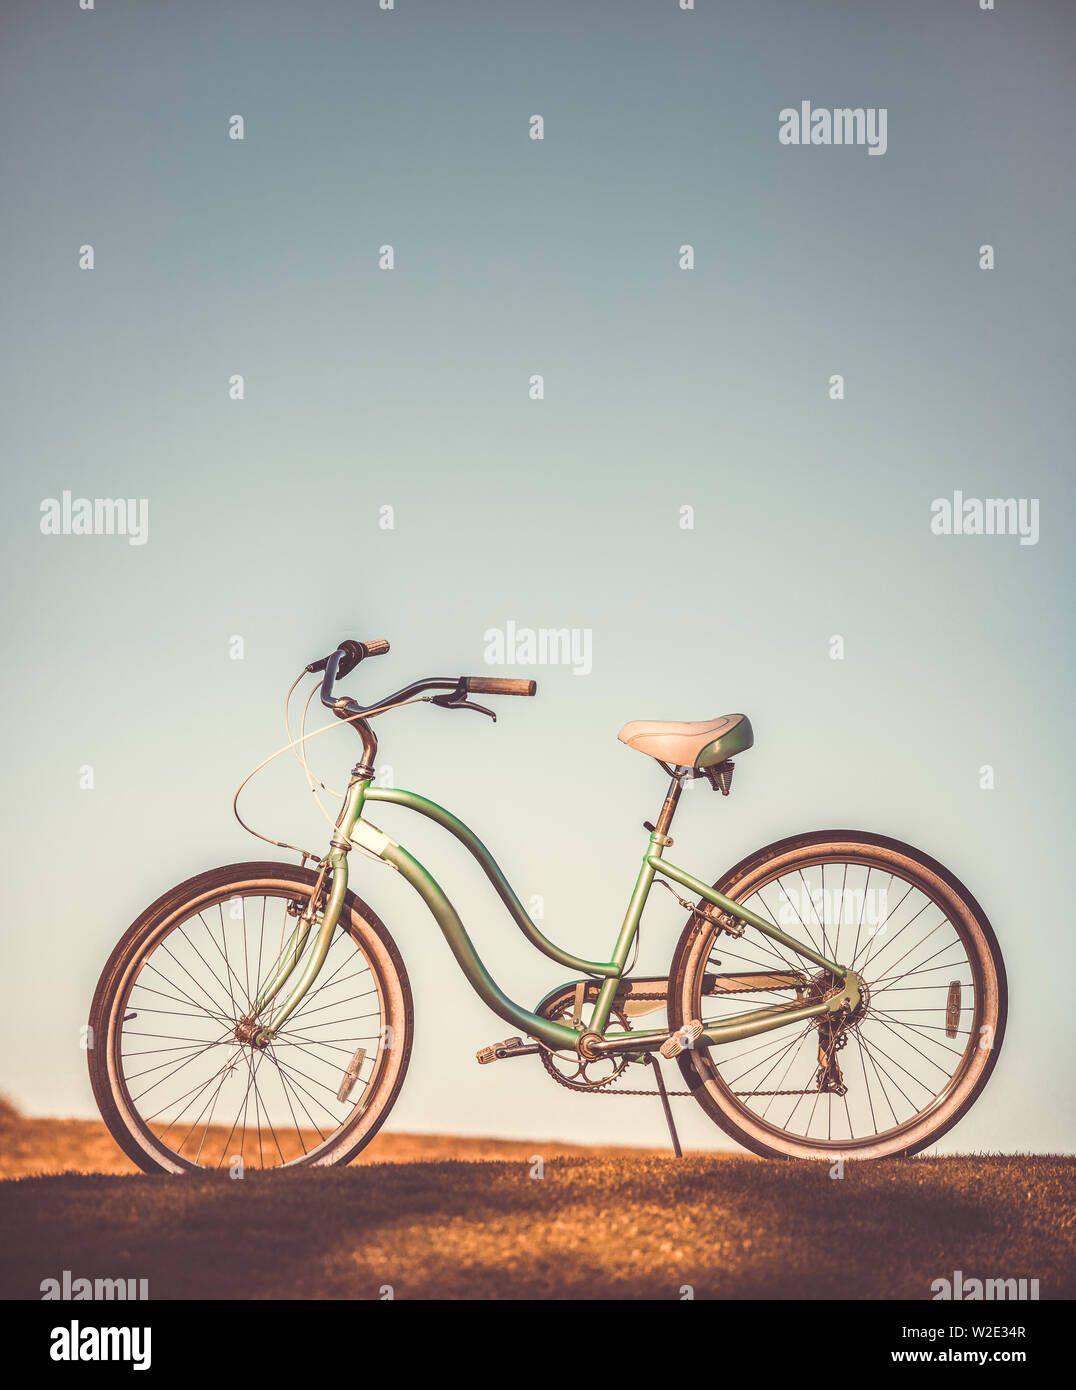 Old retro bicycle on earth and grey sky background Stock Photo